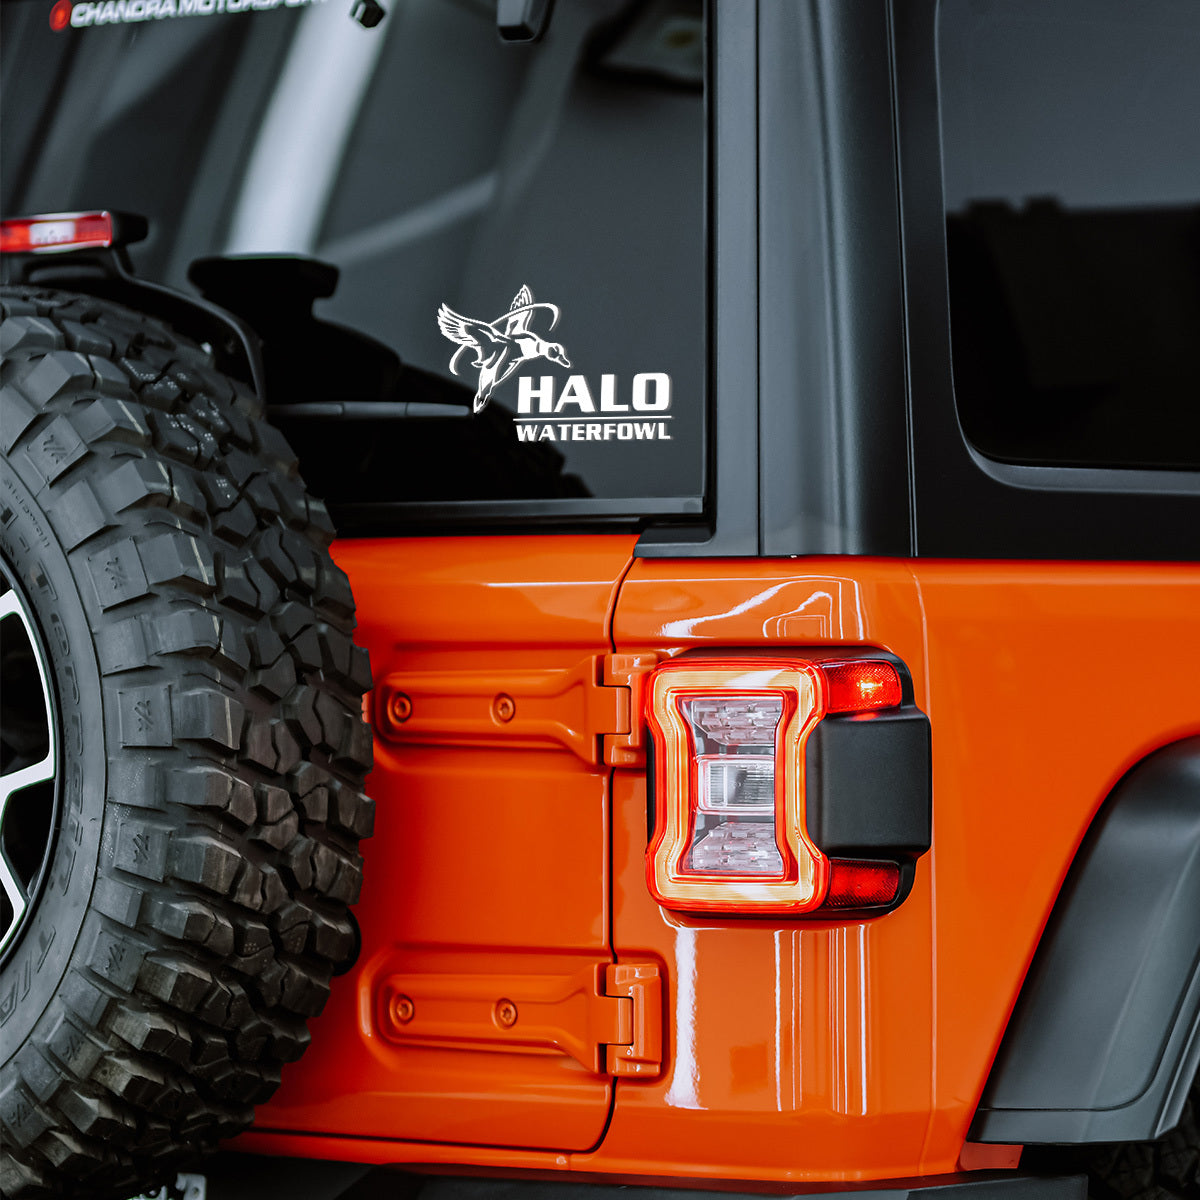 Halo Waterfowl Car Decal/White